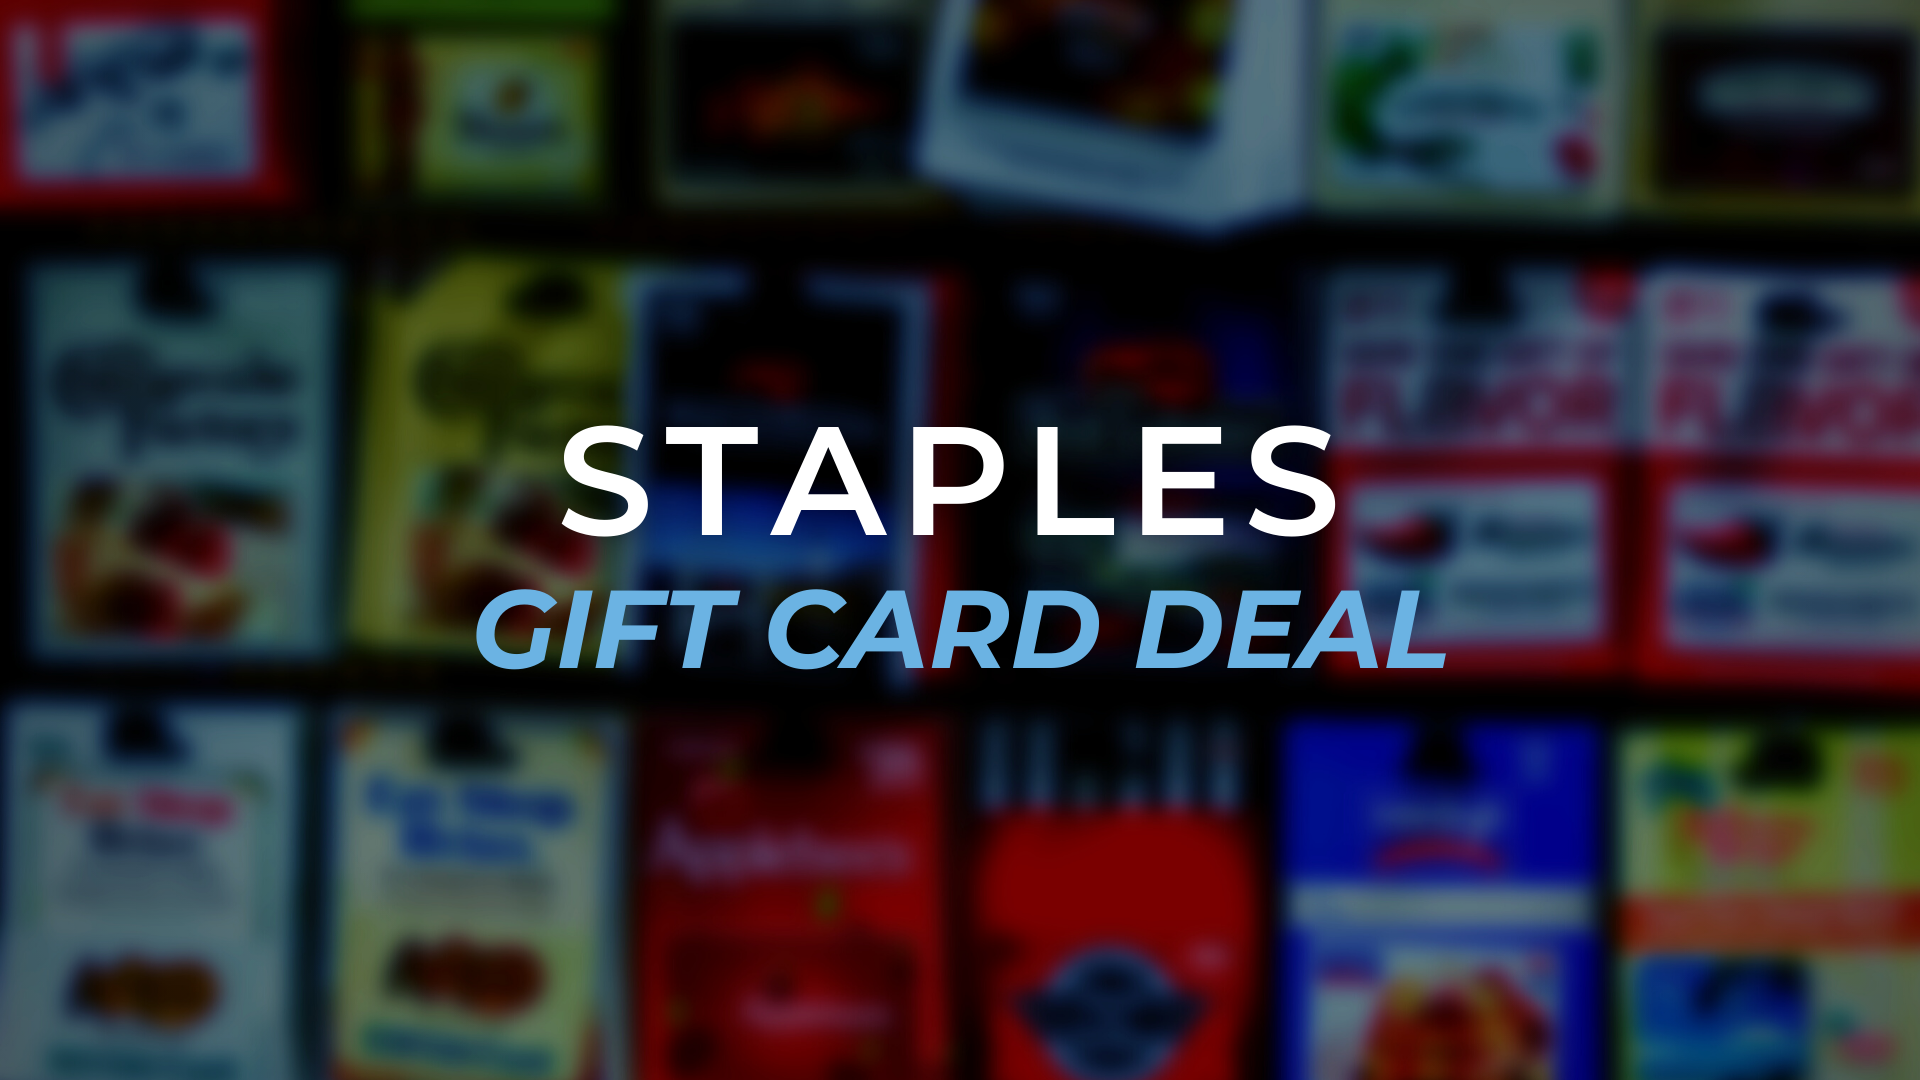 It's Back! Staples Visa Gift Card Deal No Fee + Earn 5X Miles to